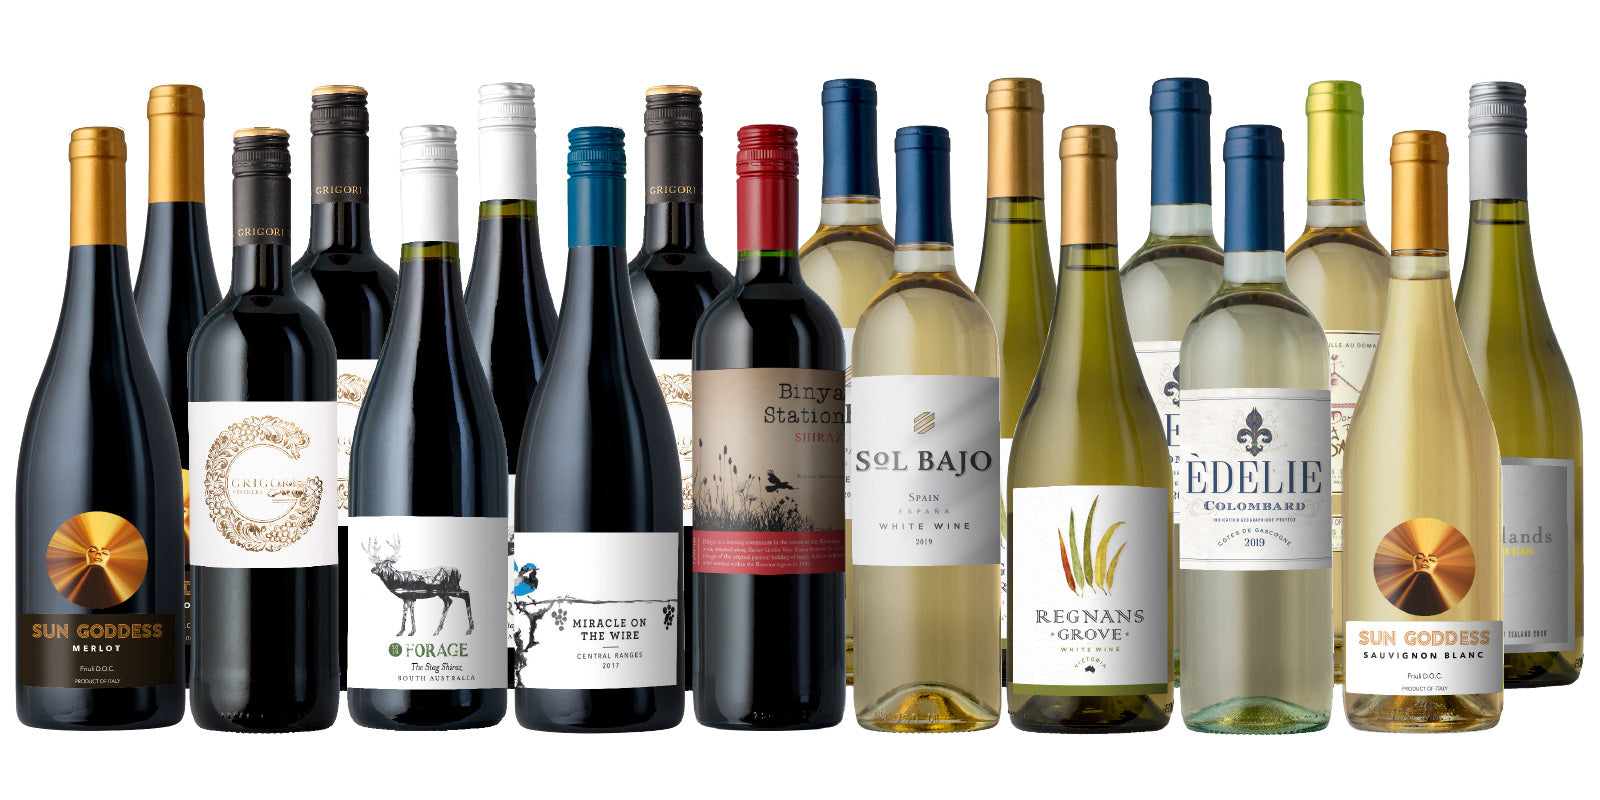 $5.55 Wines - 33,000 Reviews Celebration 18-Pack!*